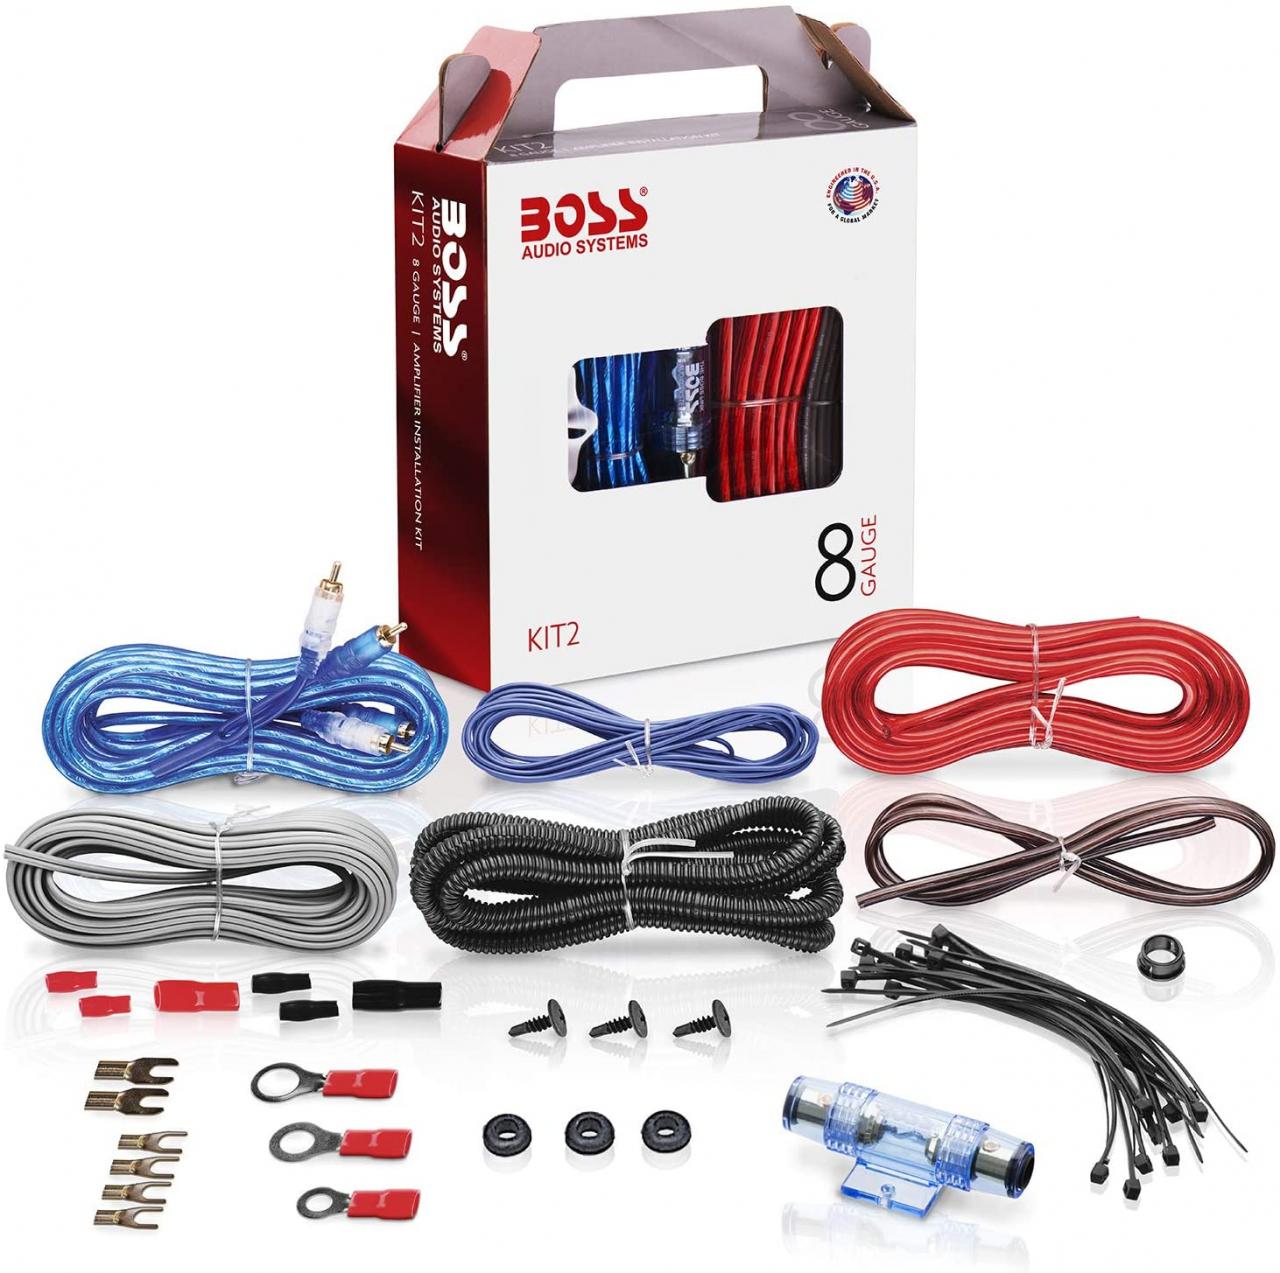 KIT10 | BOSS Audio Systems, a Leading Audio & Video Brand